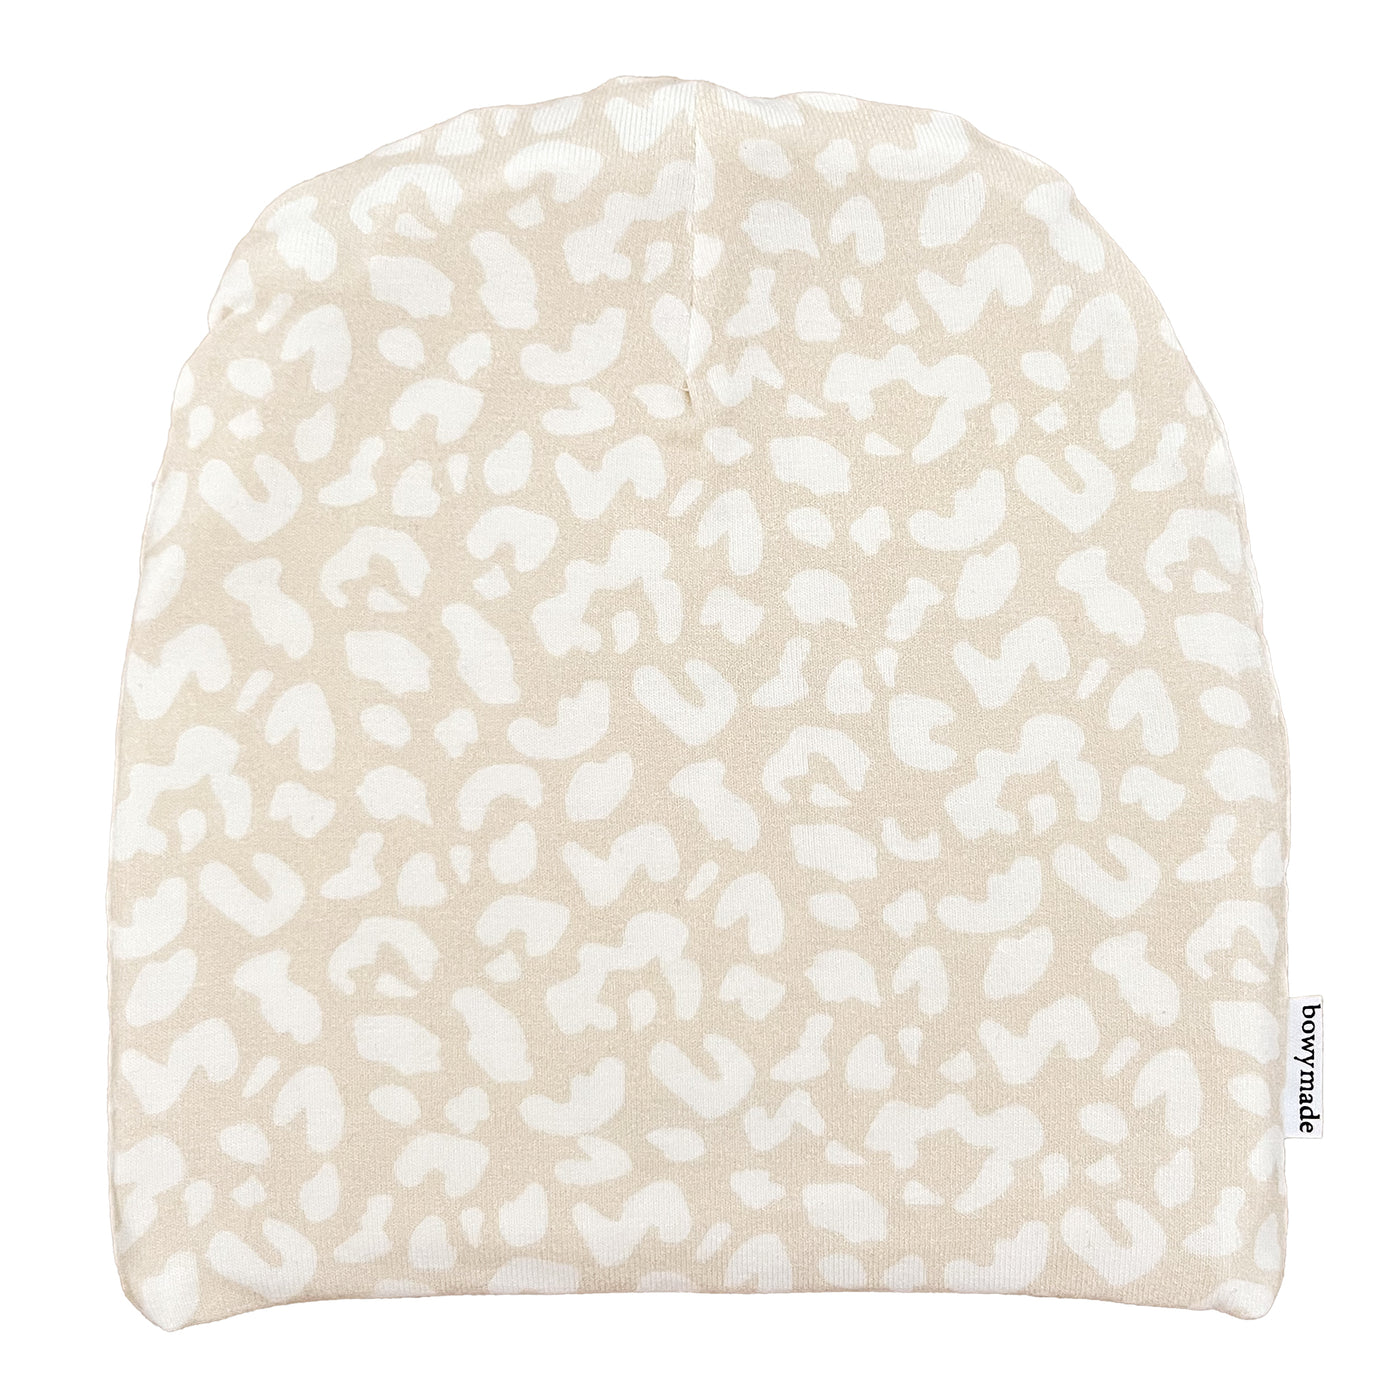 Bowy Slouch Beanie - Leopard